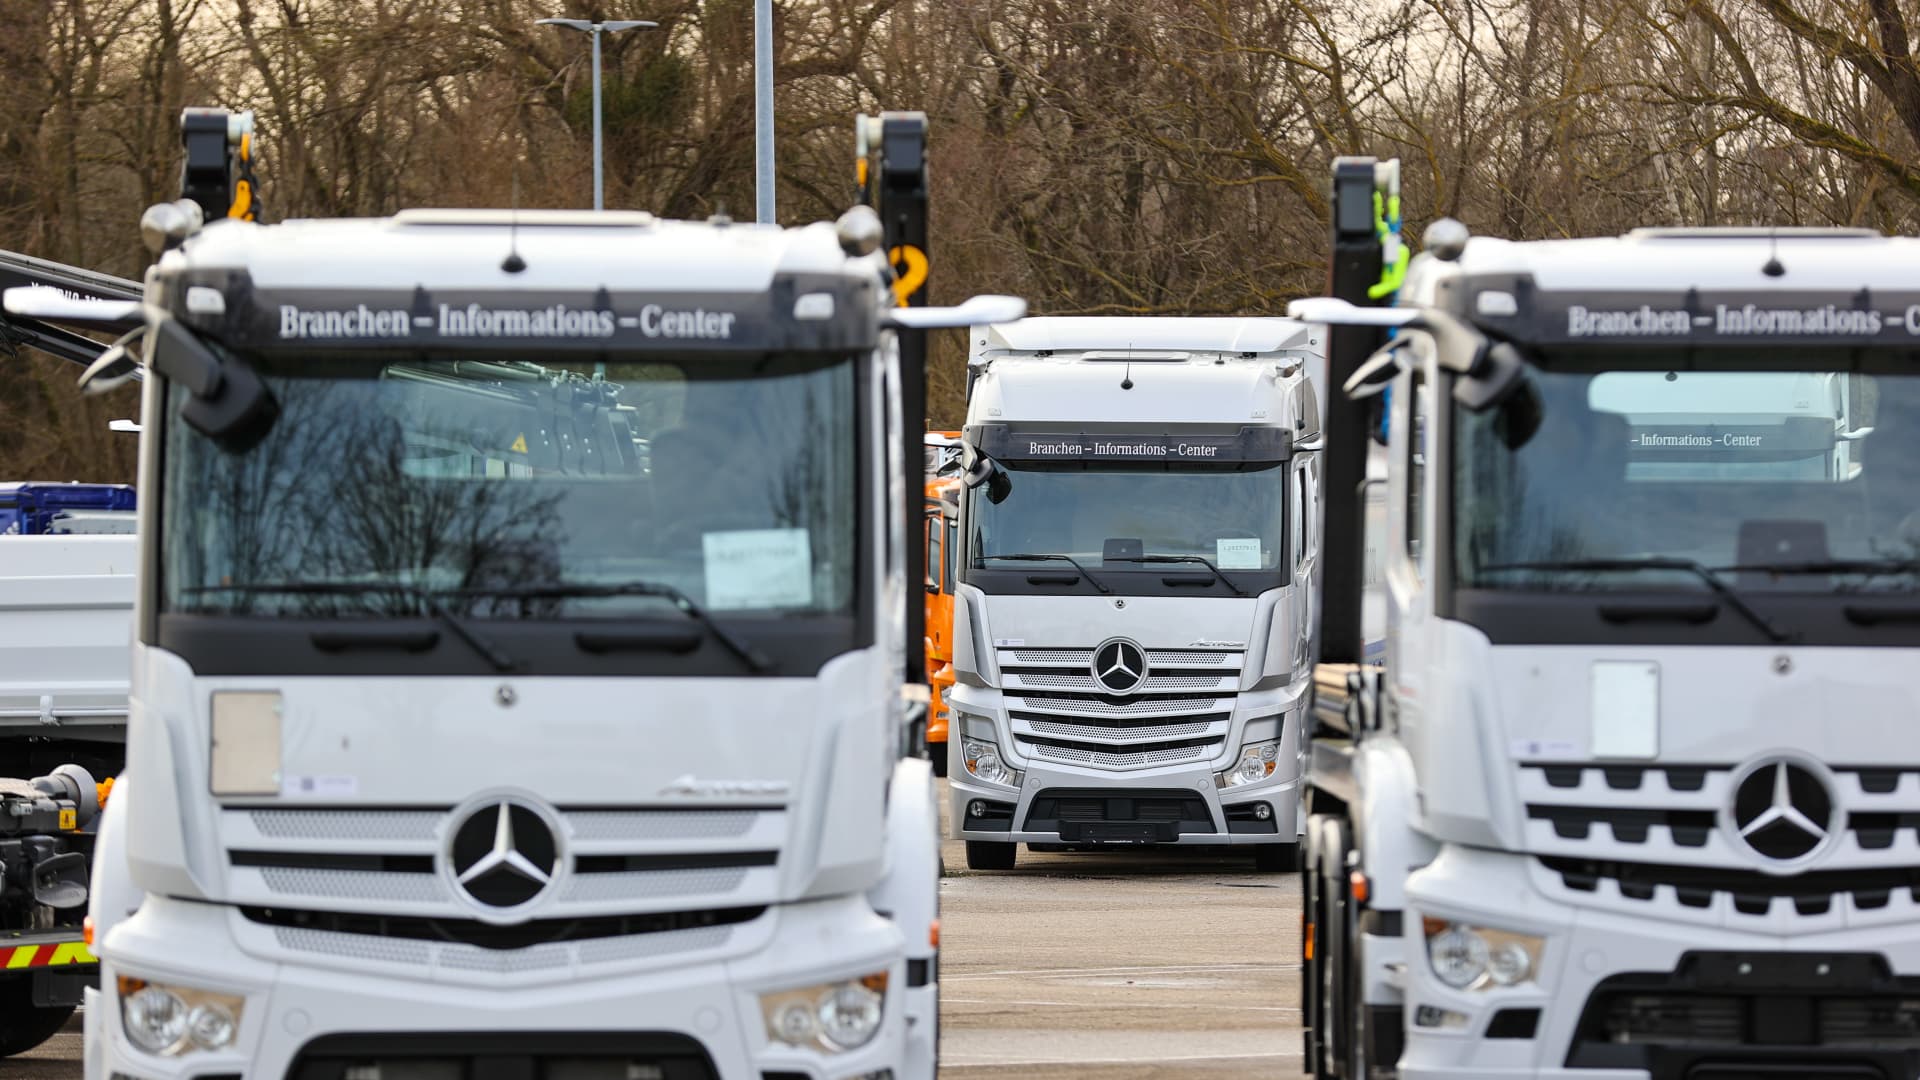 Daimler Trucks says it’s facing enormous supply chain pressure